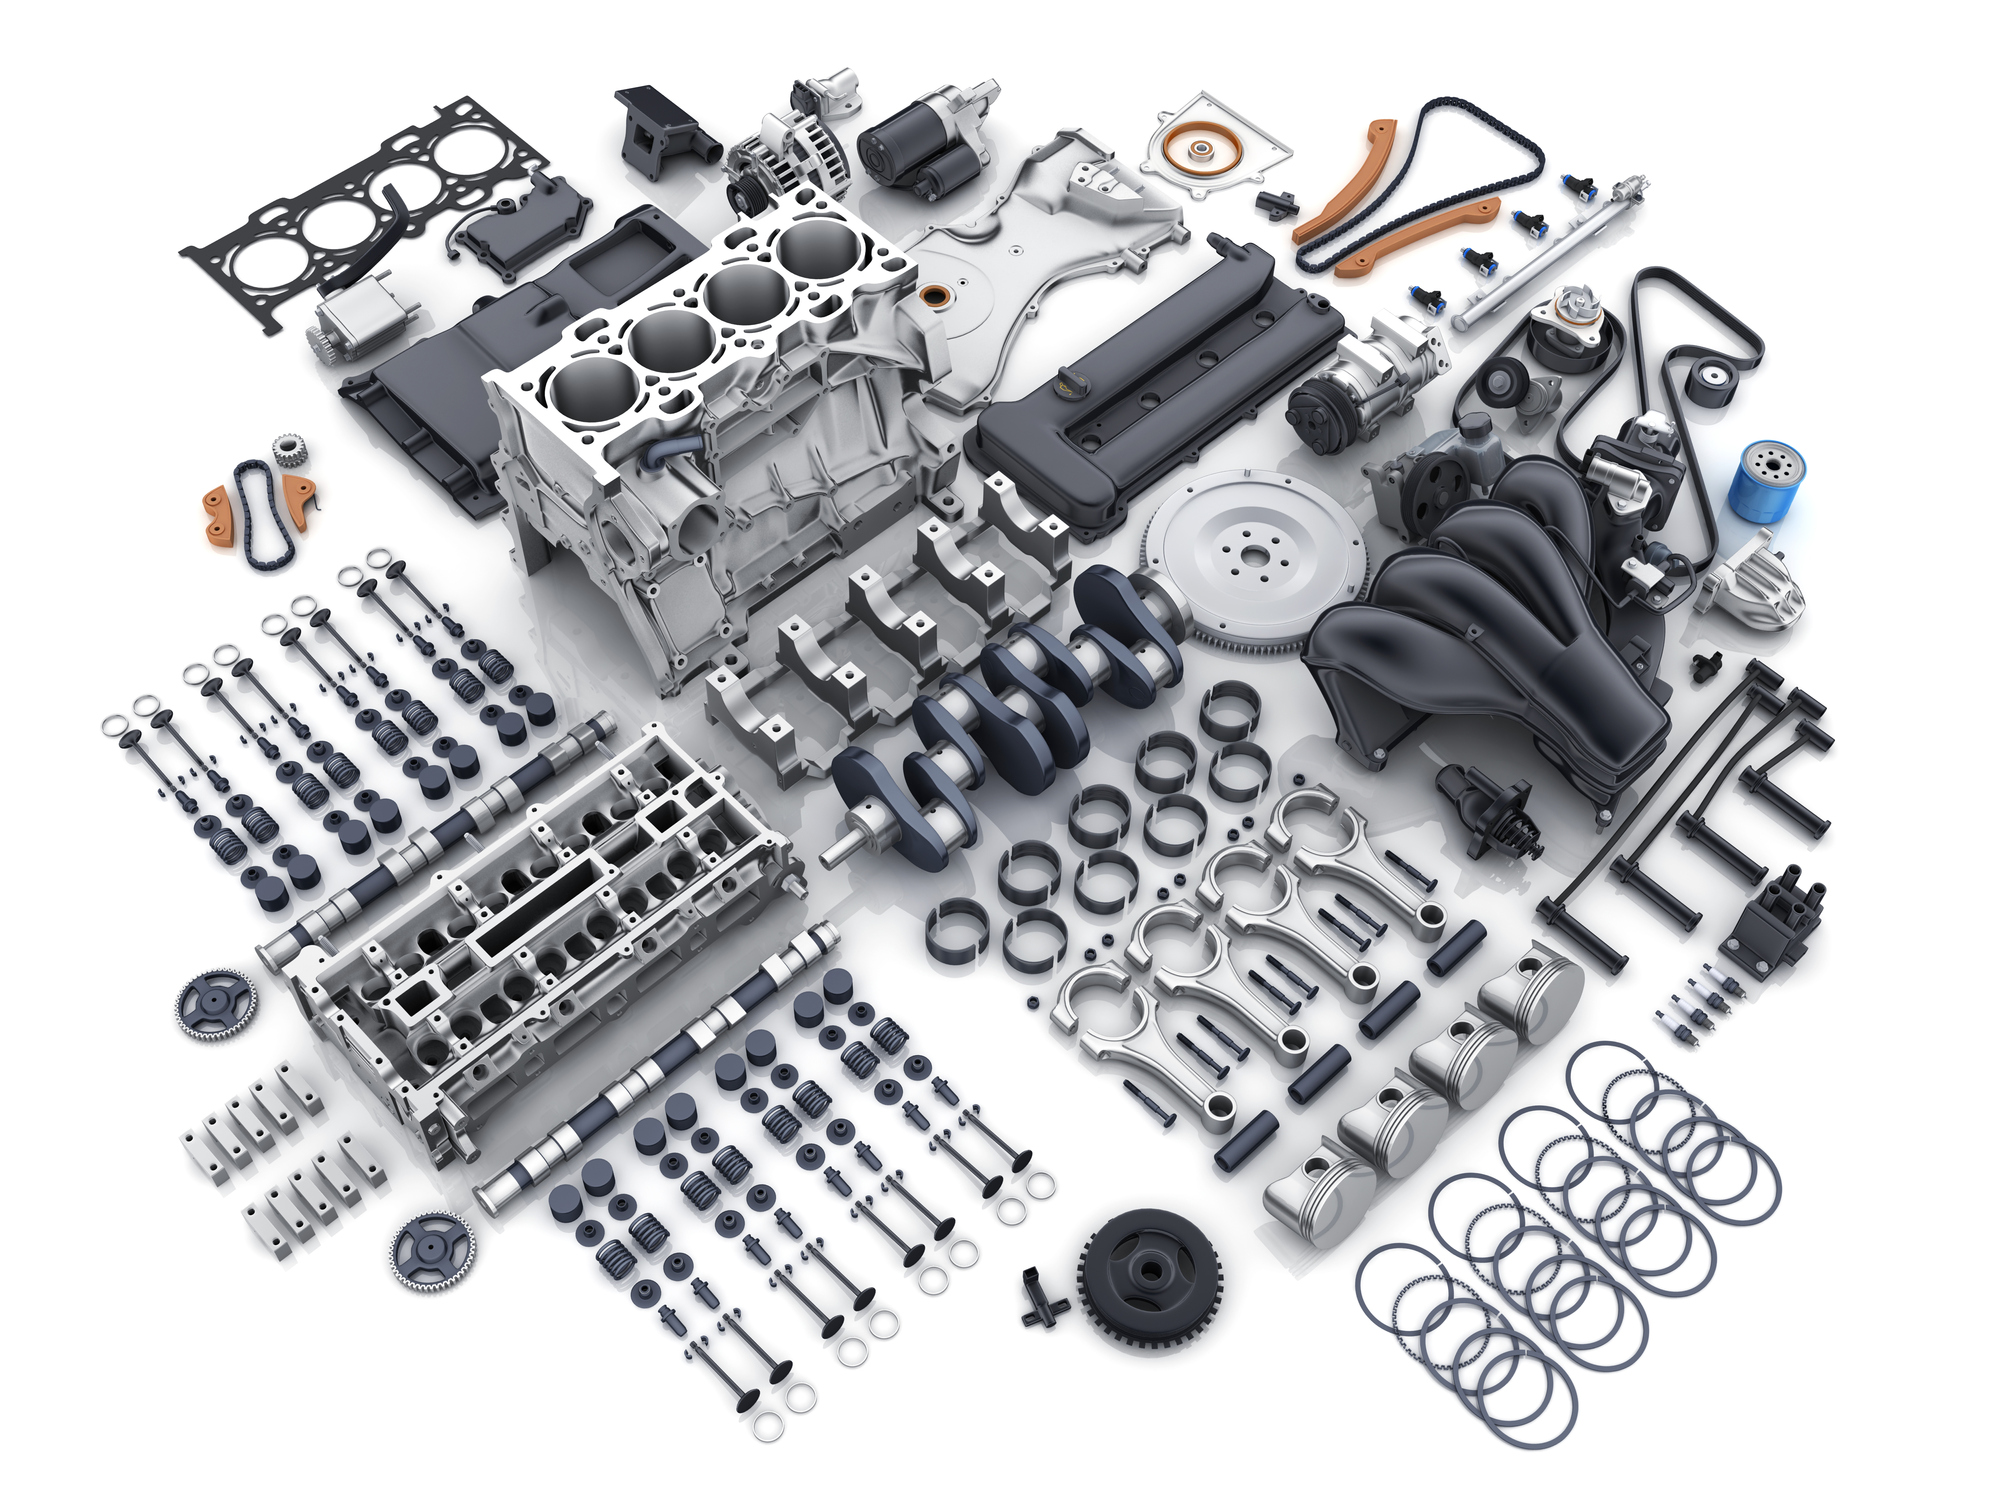 Engine Components and Functionality